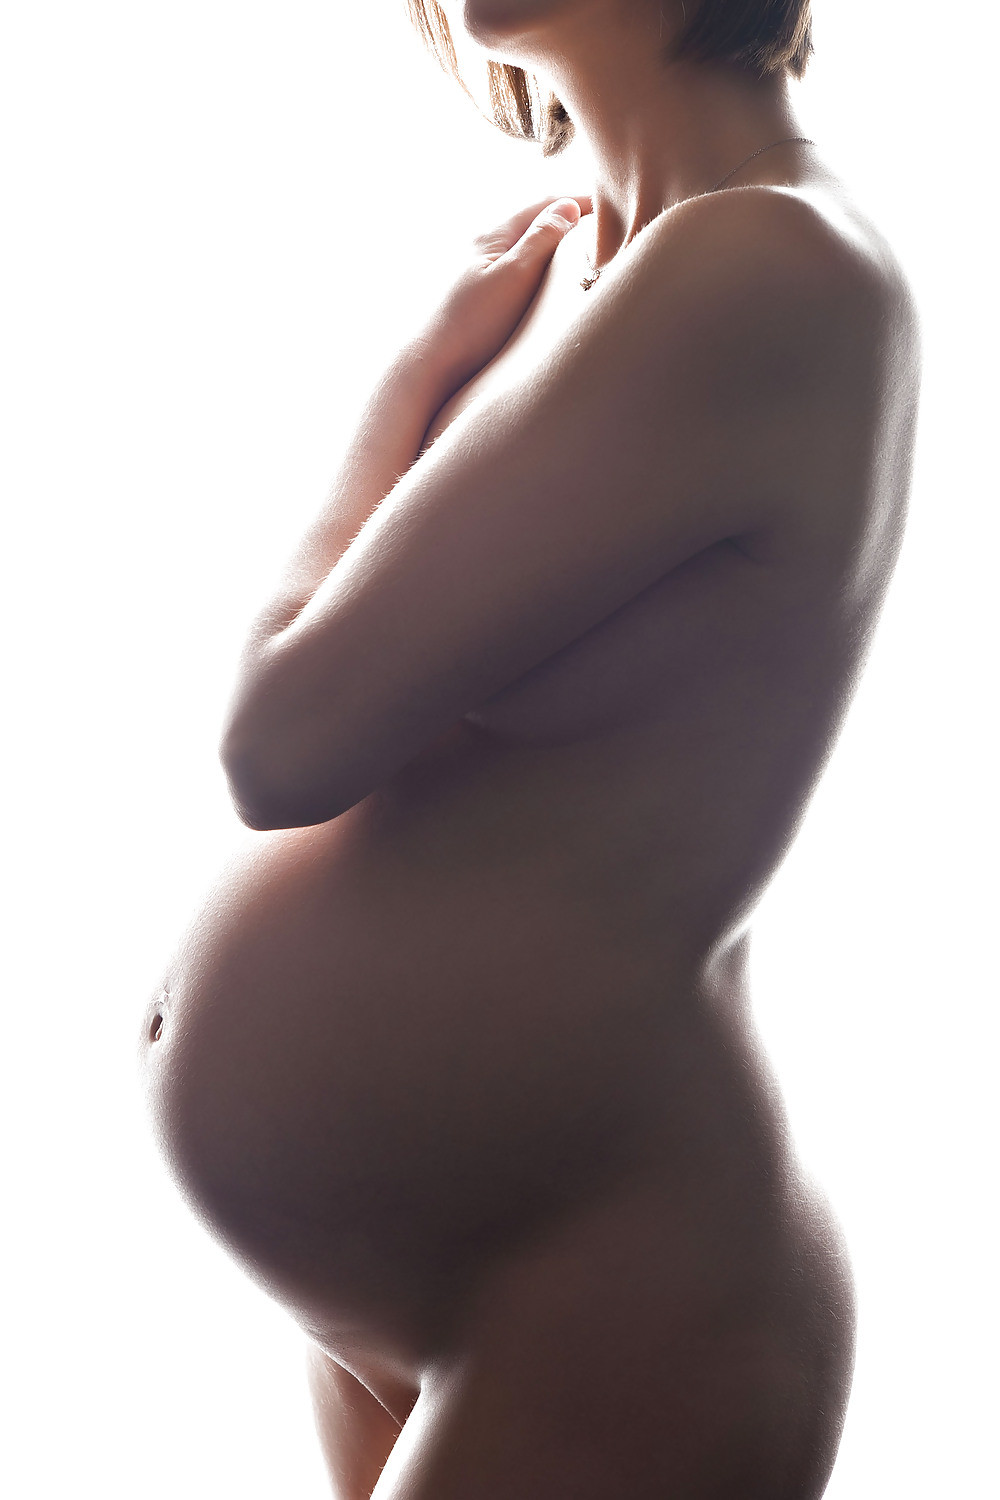 Pictures of nude pregnant wifes #67712626